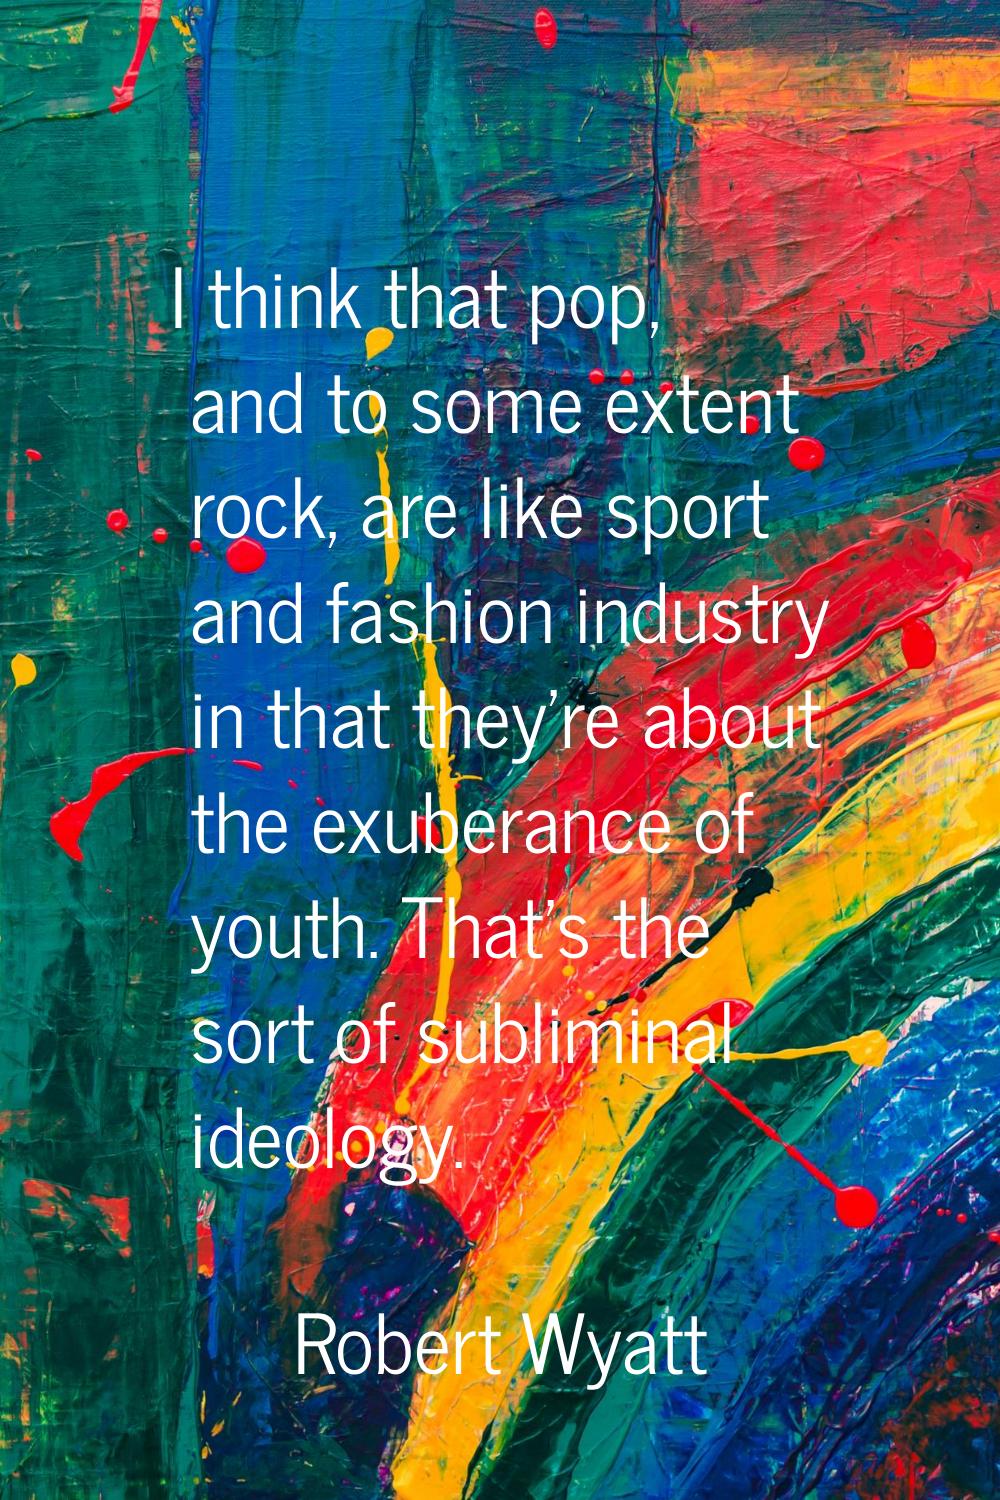 I think that pop, and to some extent rock, are like sport and fashion industry in that they're abou